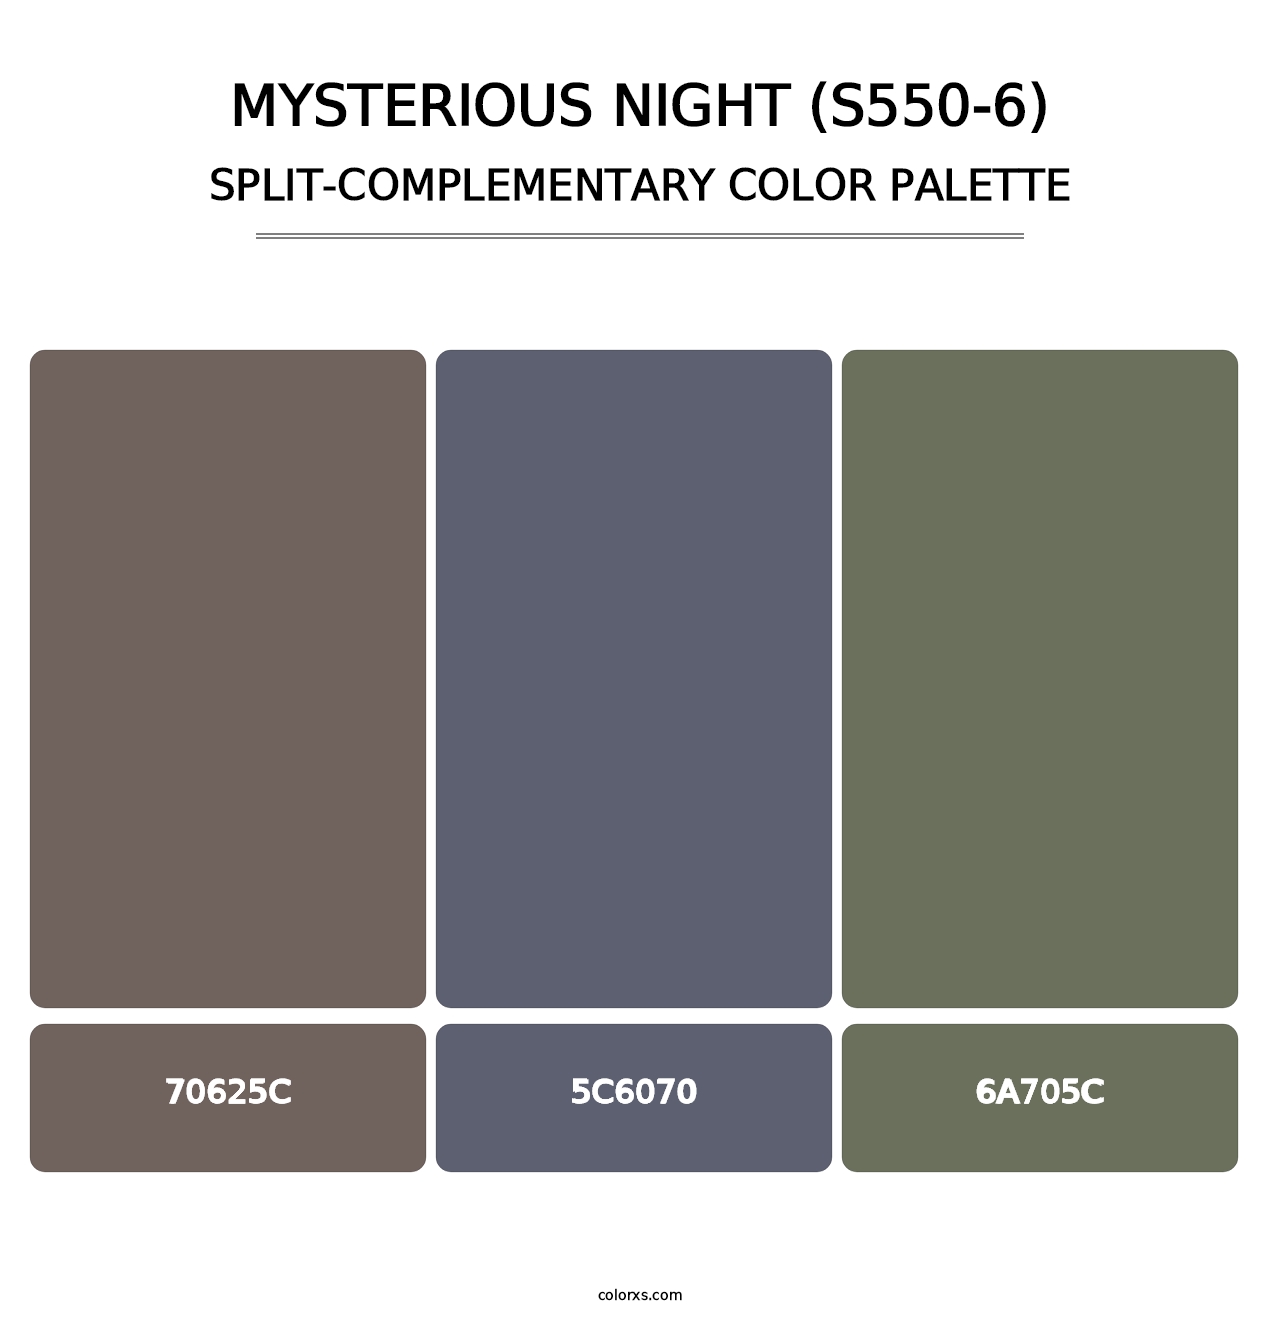 Mysterious Night (S550-6) - Split-Complementary Color Palette